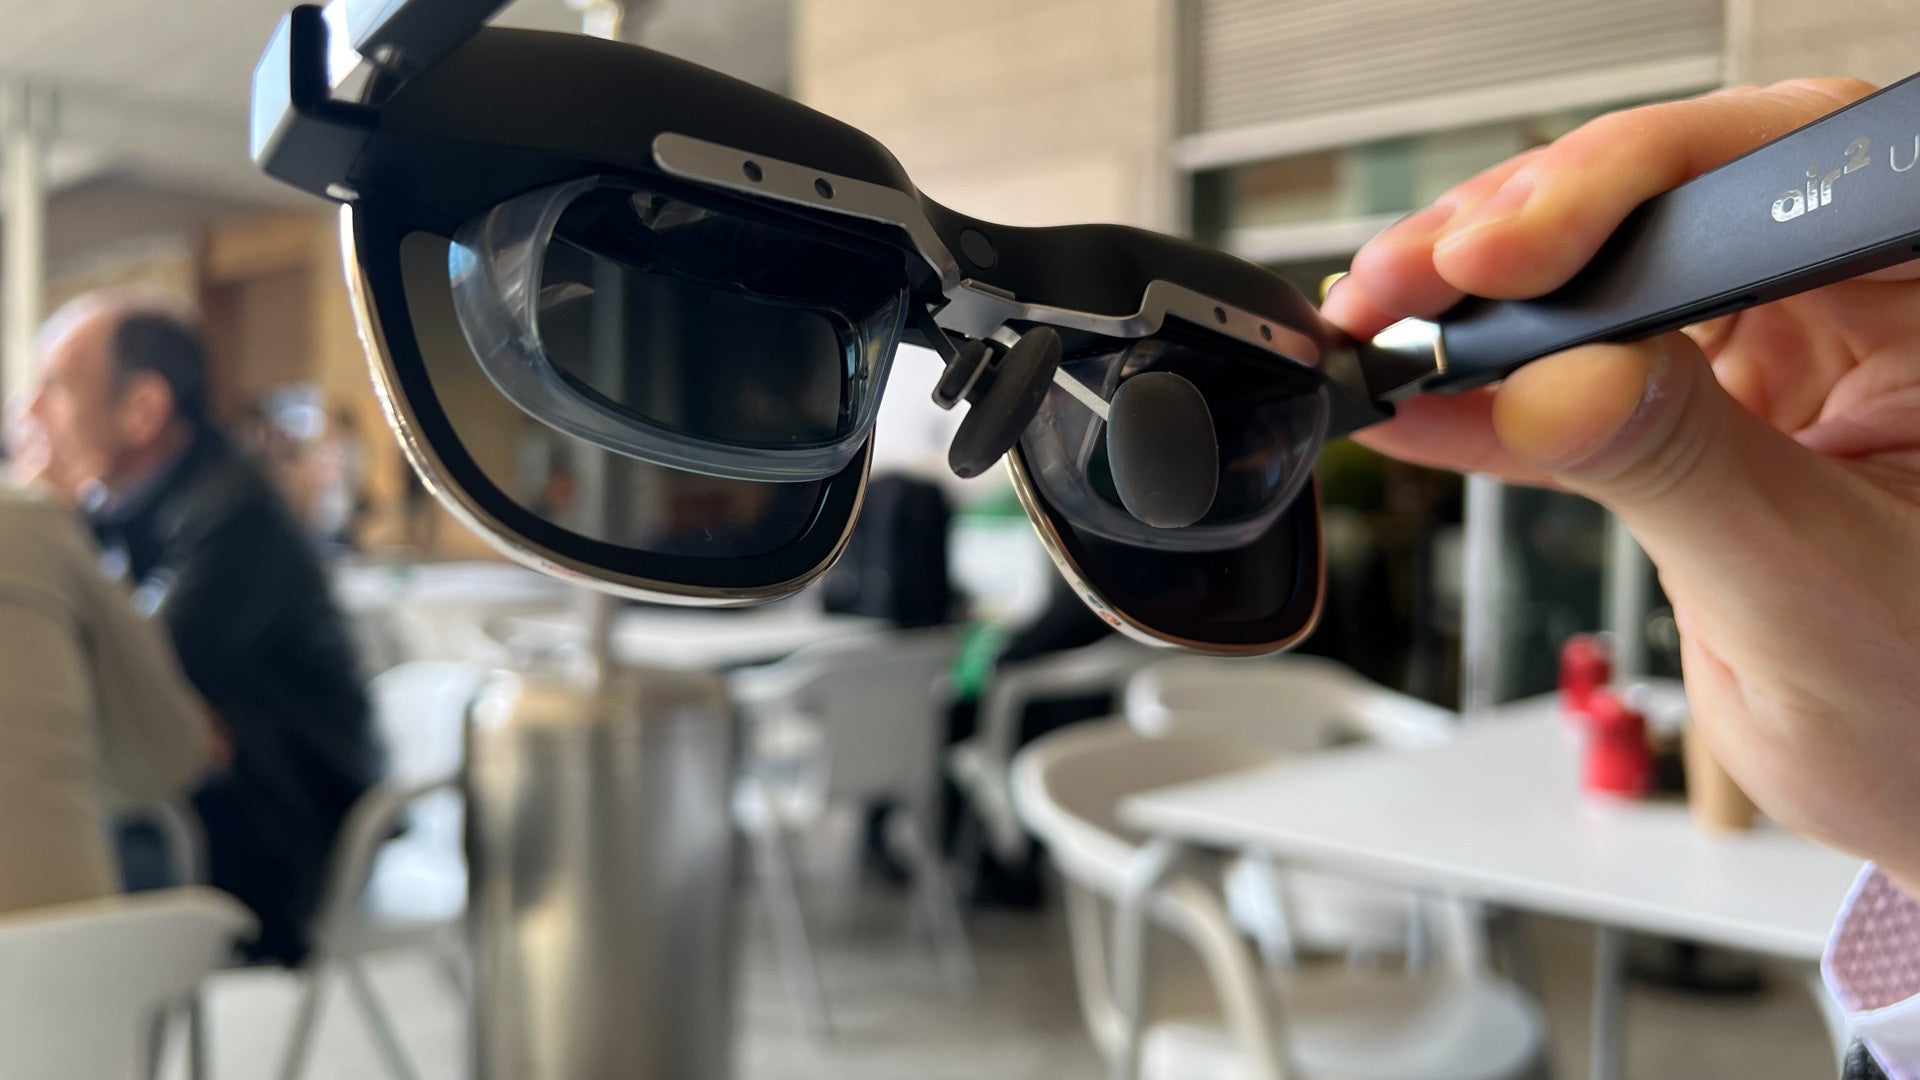 Xreal Air 2 Ultra Hands-On: These Glasses Put Screens All Around